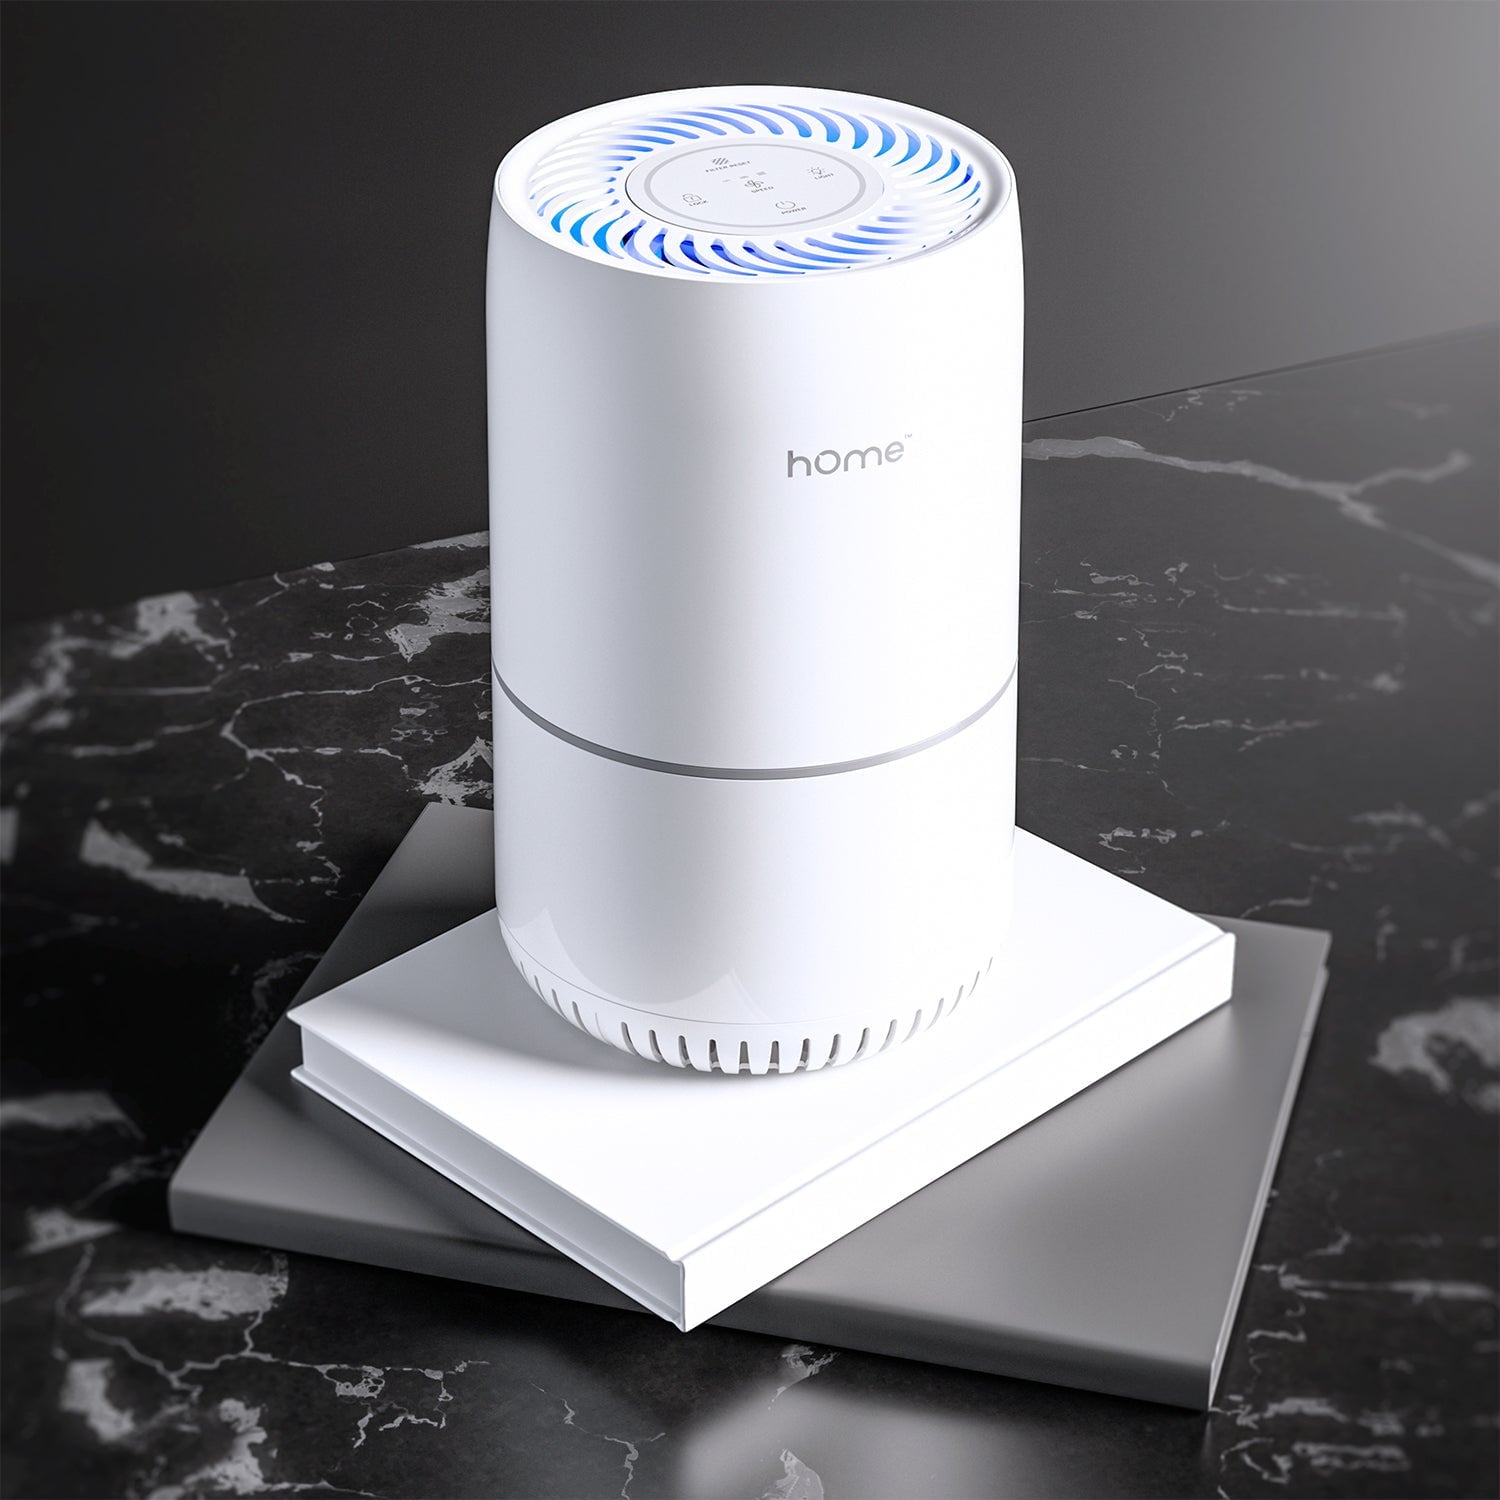 hOmeLabs True HEPA Air Purifier with H13 Filter - Removes 99.97% of Airborne Particles with Activated Carbon and 3-Stage Filtration to Significantly Improve Indoor Air Quality